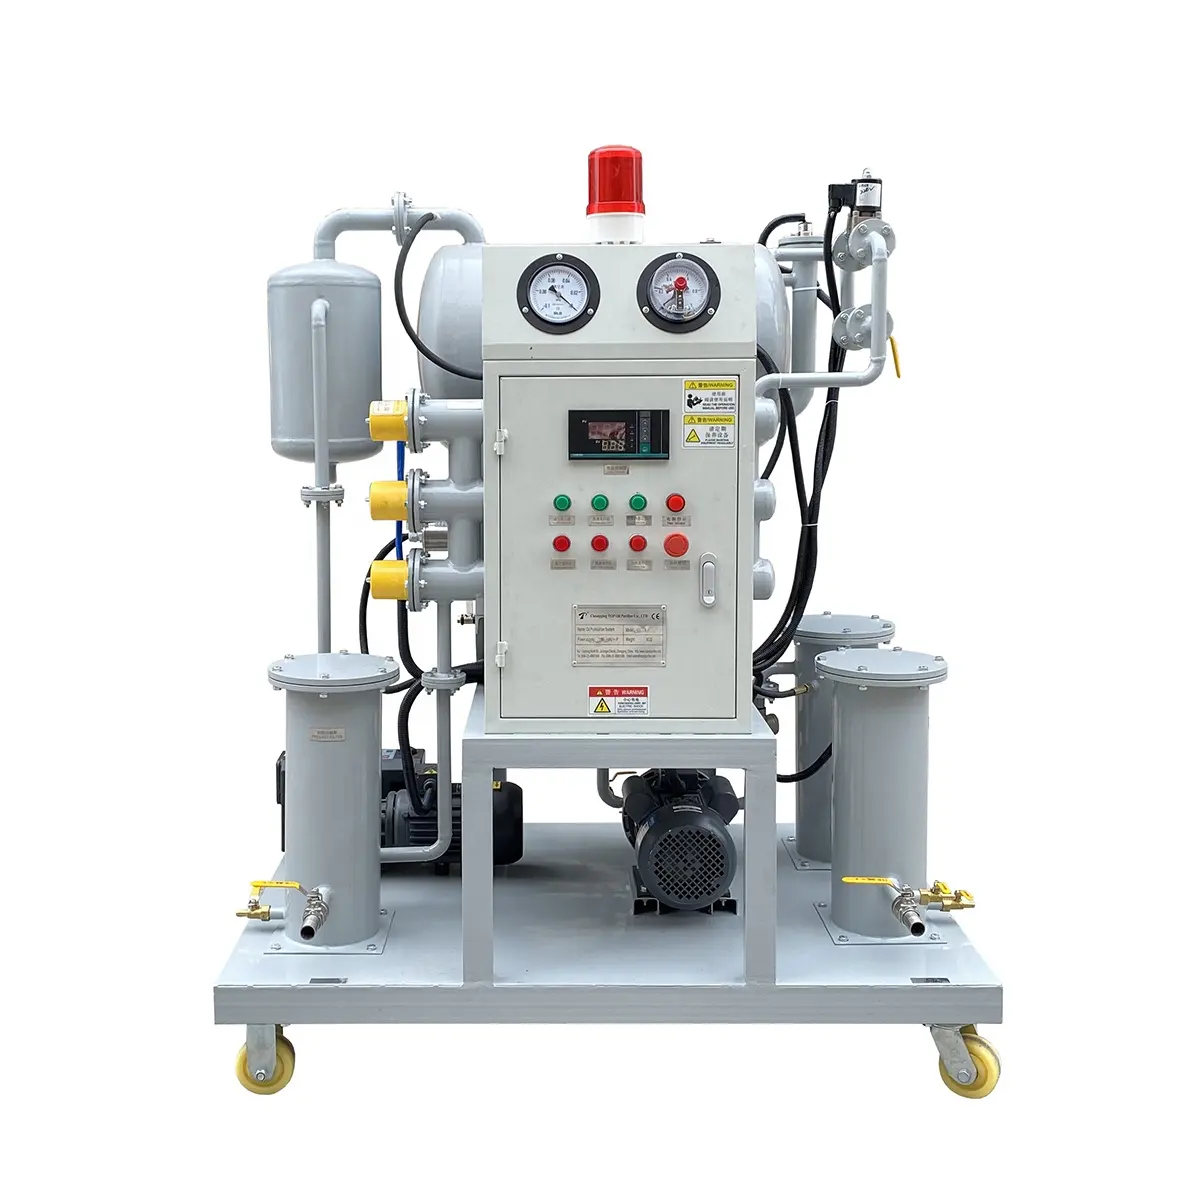 ZY-6 Favorable Factory Price Vacuum Insulating Oil/Transformer Oil Purification Machine